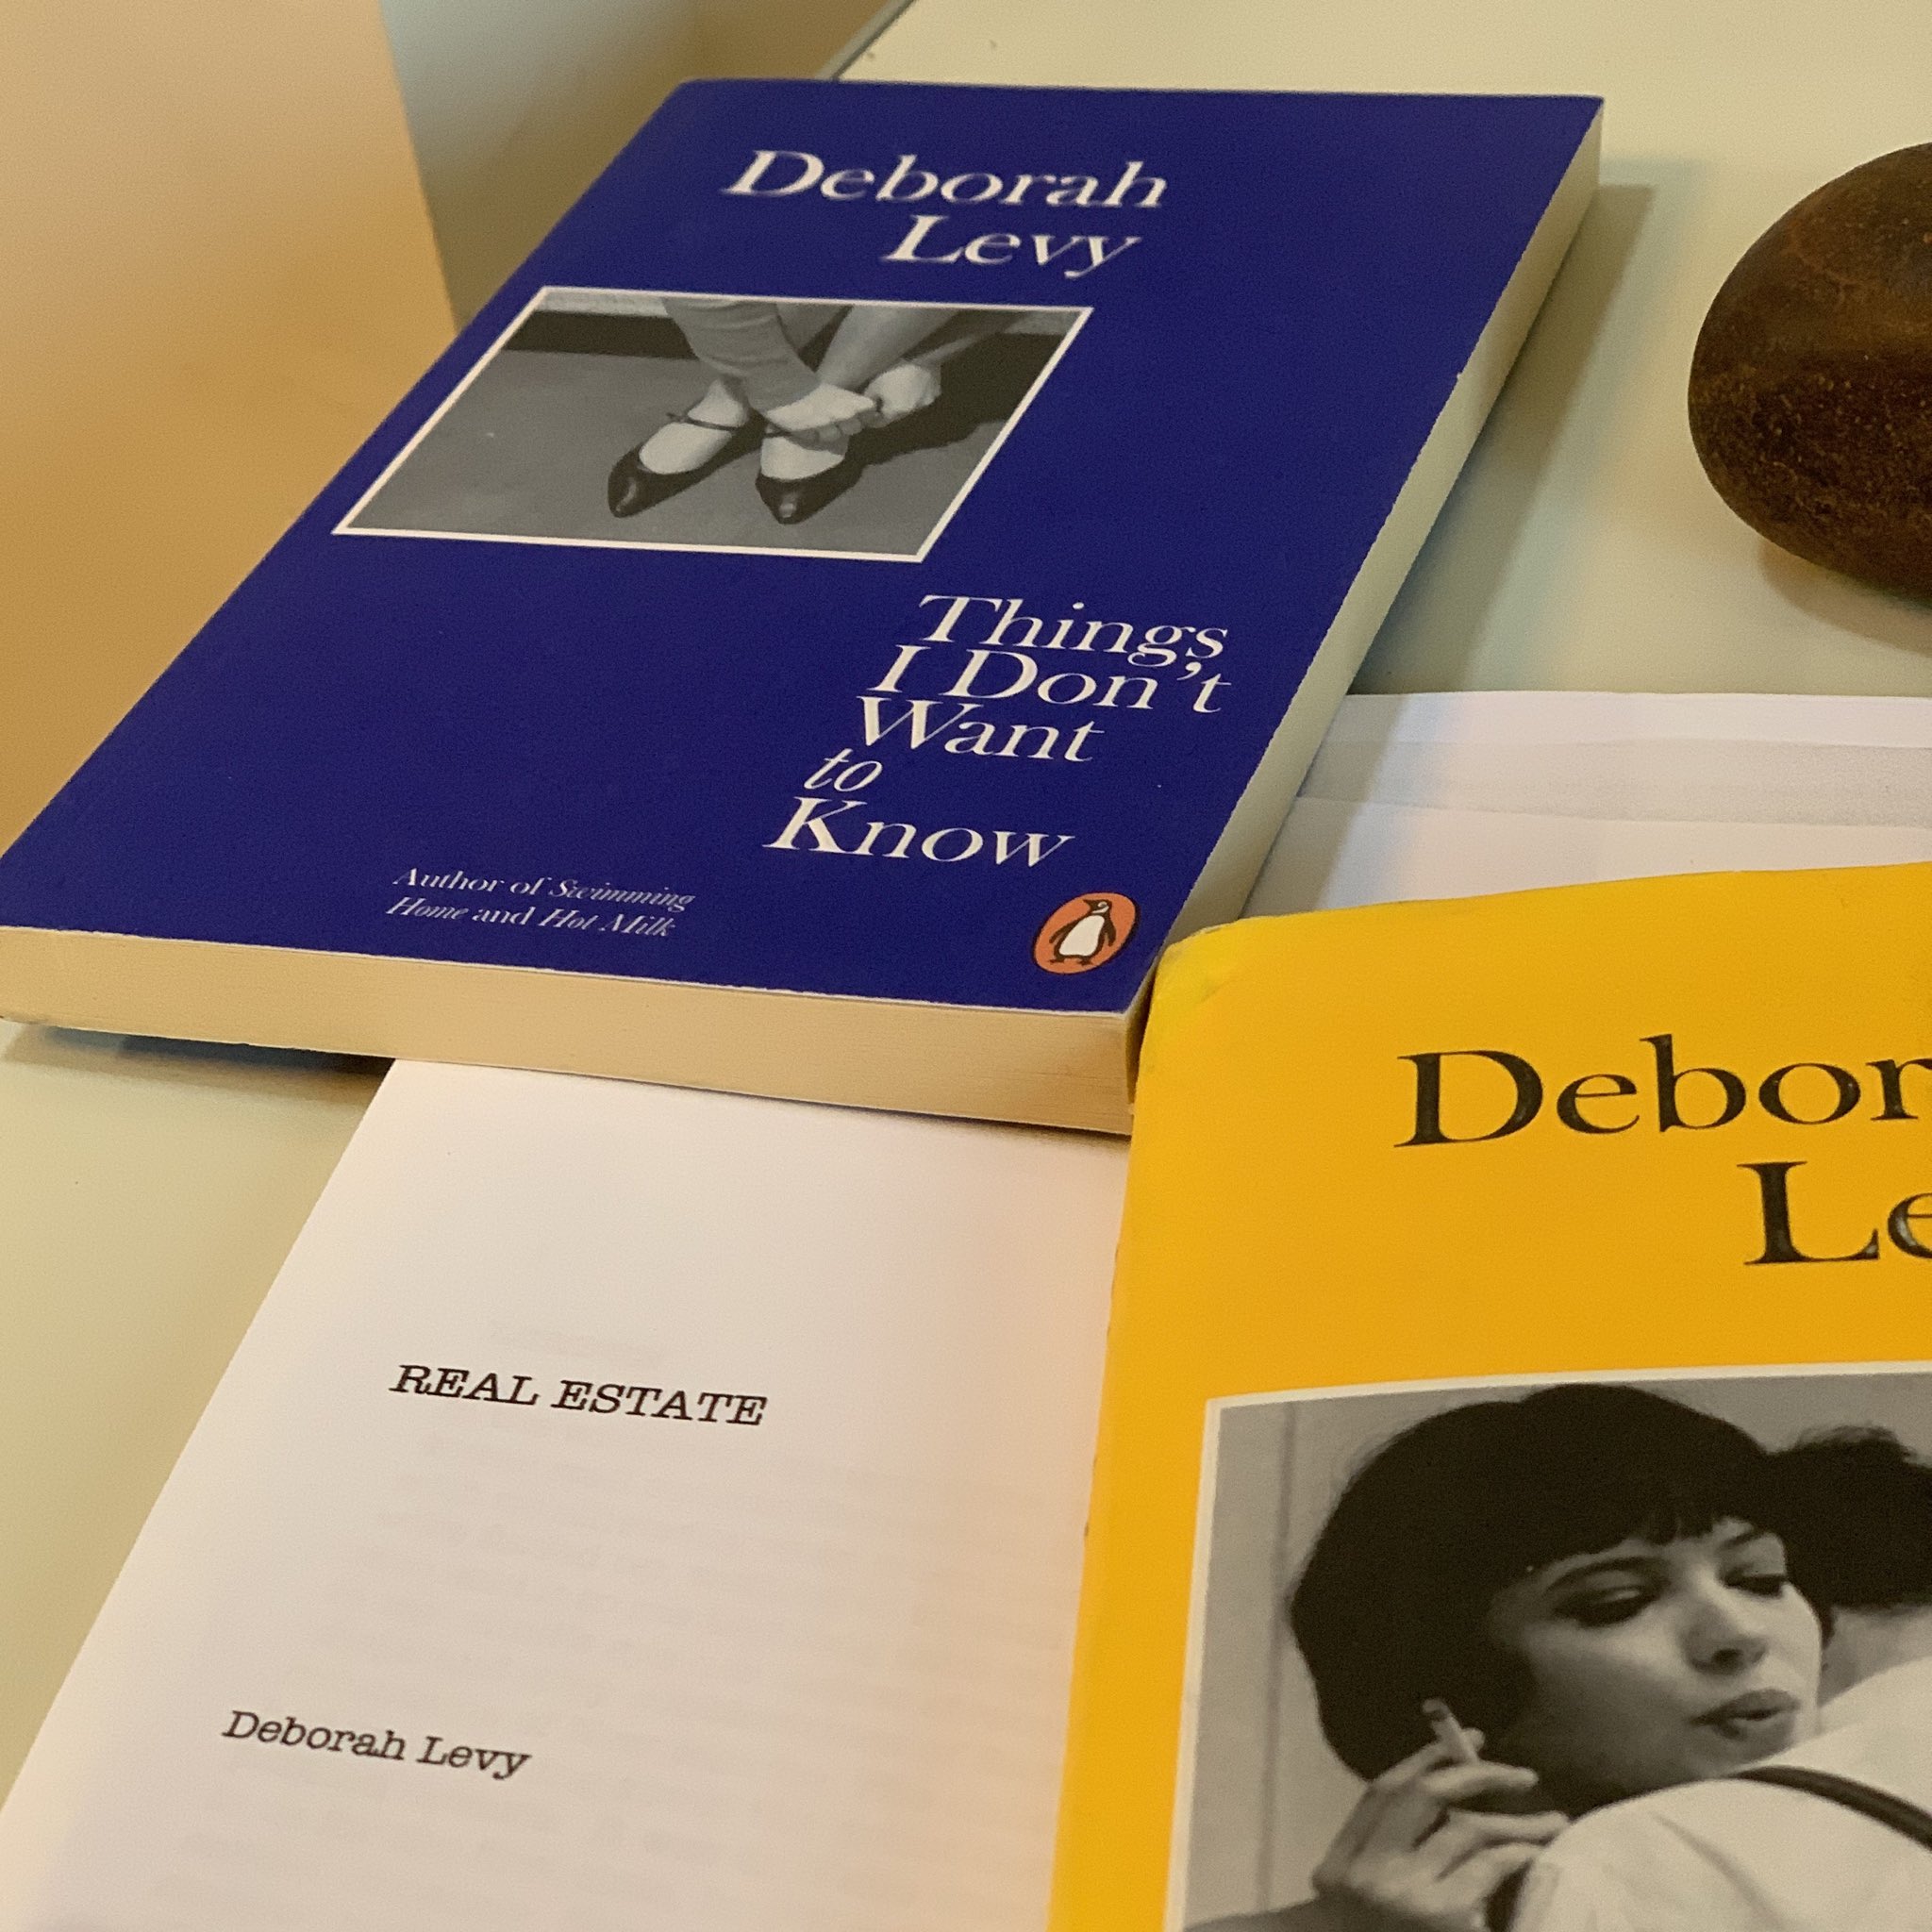 Blodig Forskelsbehandling privat Simon Prosser on Twitter: "New Deborah Levy manuscript REAL ESTATE heading  to copy-editing today, preparing to join first two books in her 'living  autobiography' sequence... https://t.co/MFkxsWKoPy" / Twitter